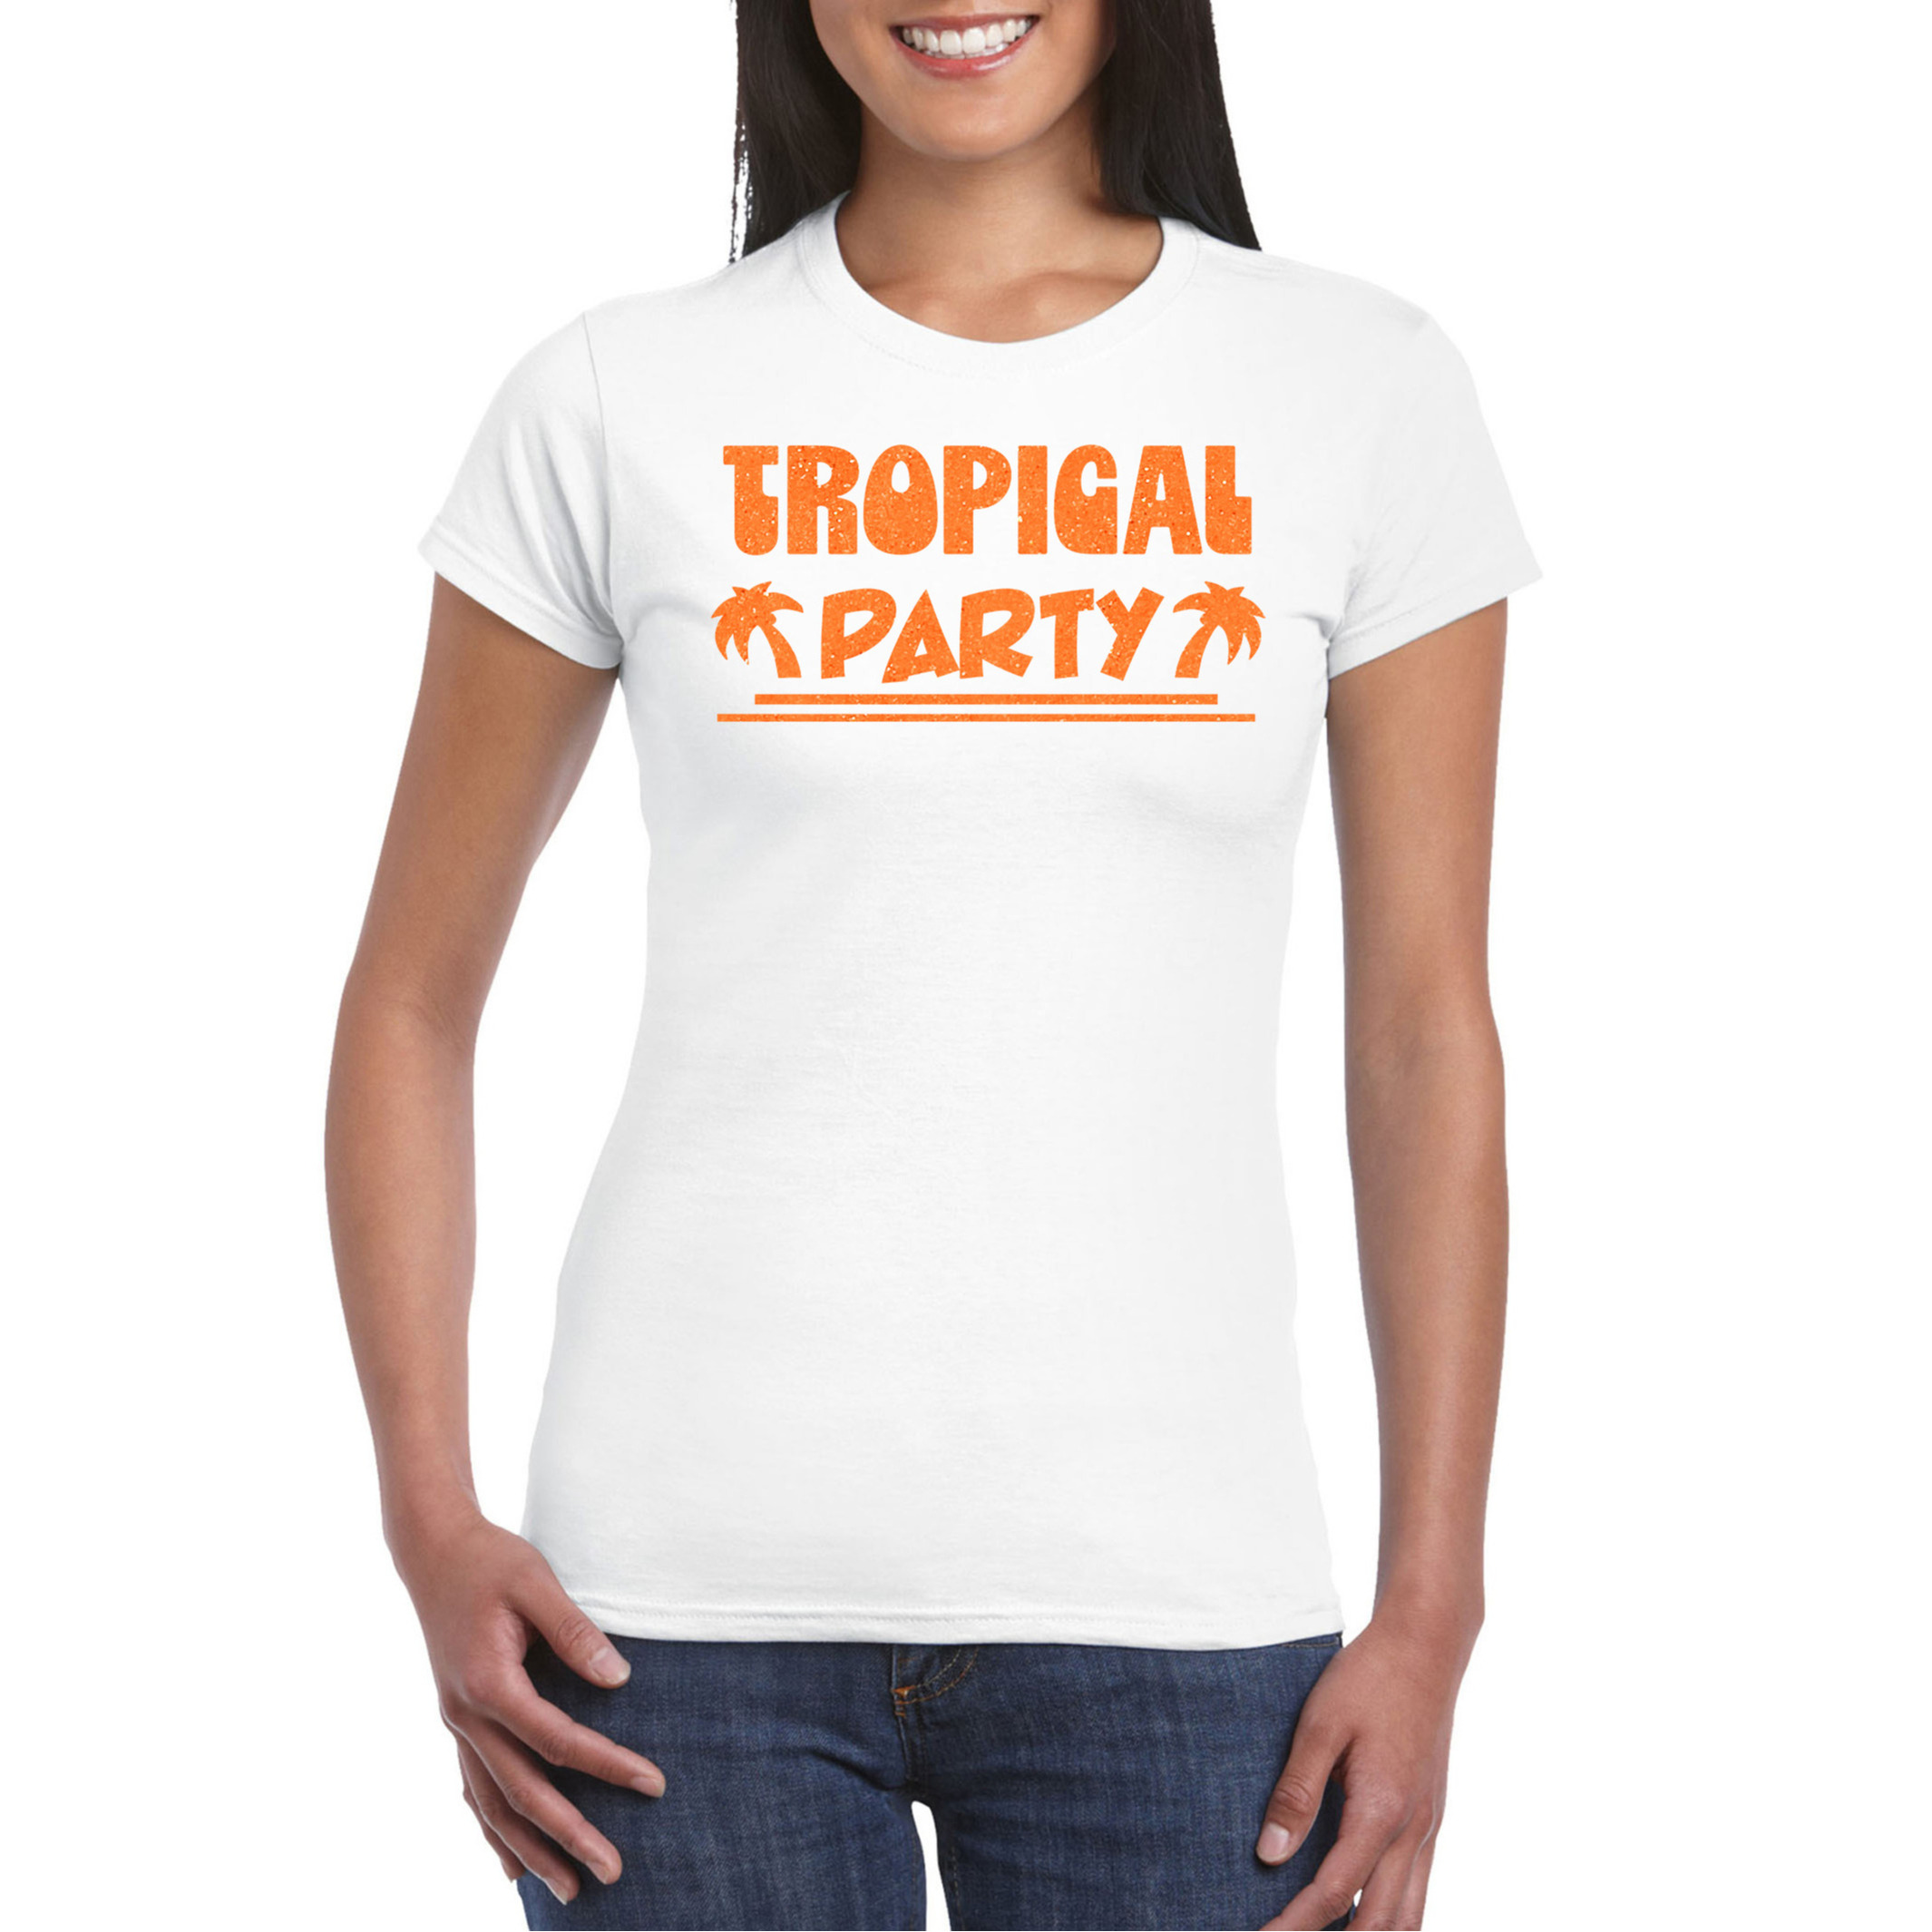 Toppers Tropical party T-shirt voor dames met glitters wit-oranje carnaval-themafeest